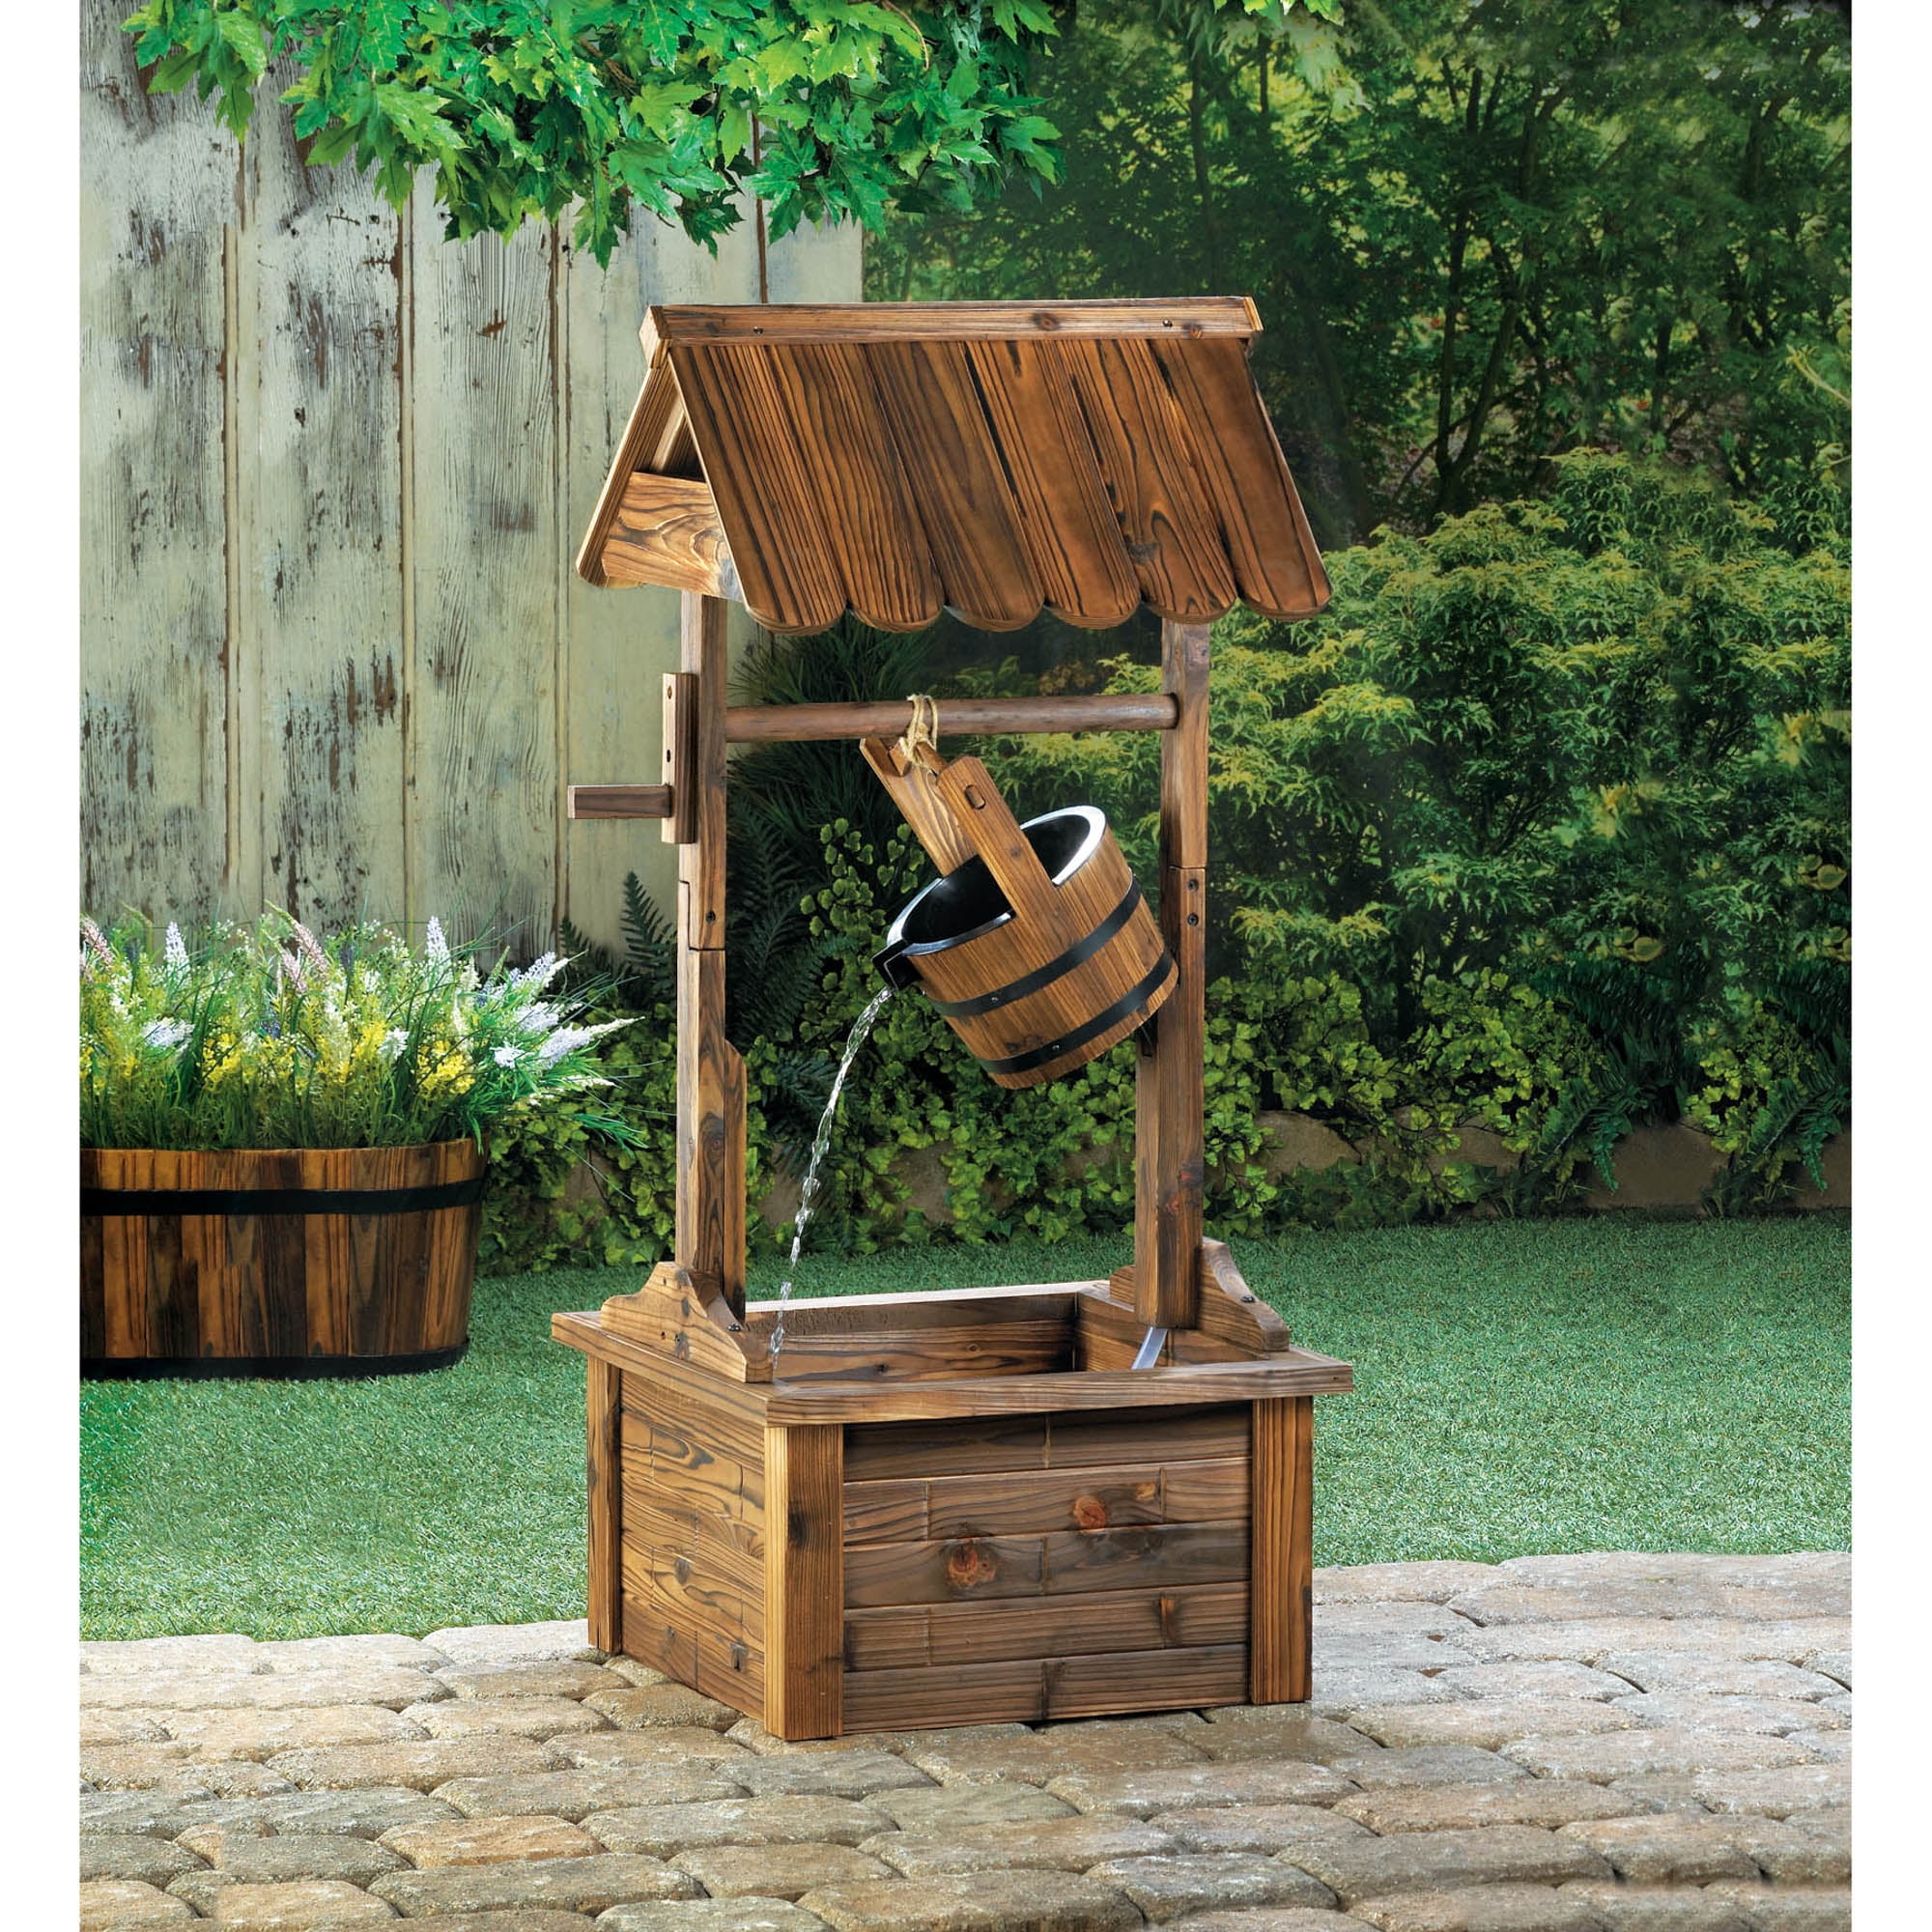 44 inch Wishing Well Water Fountain Rustic Wooden Outdoor w/Electric Pump 